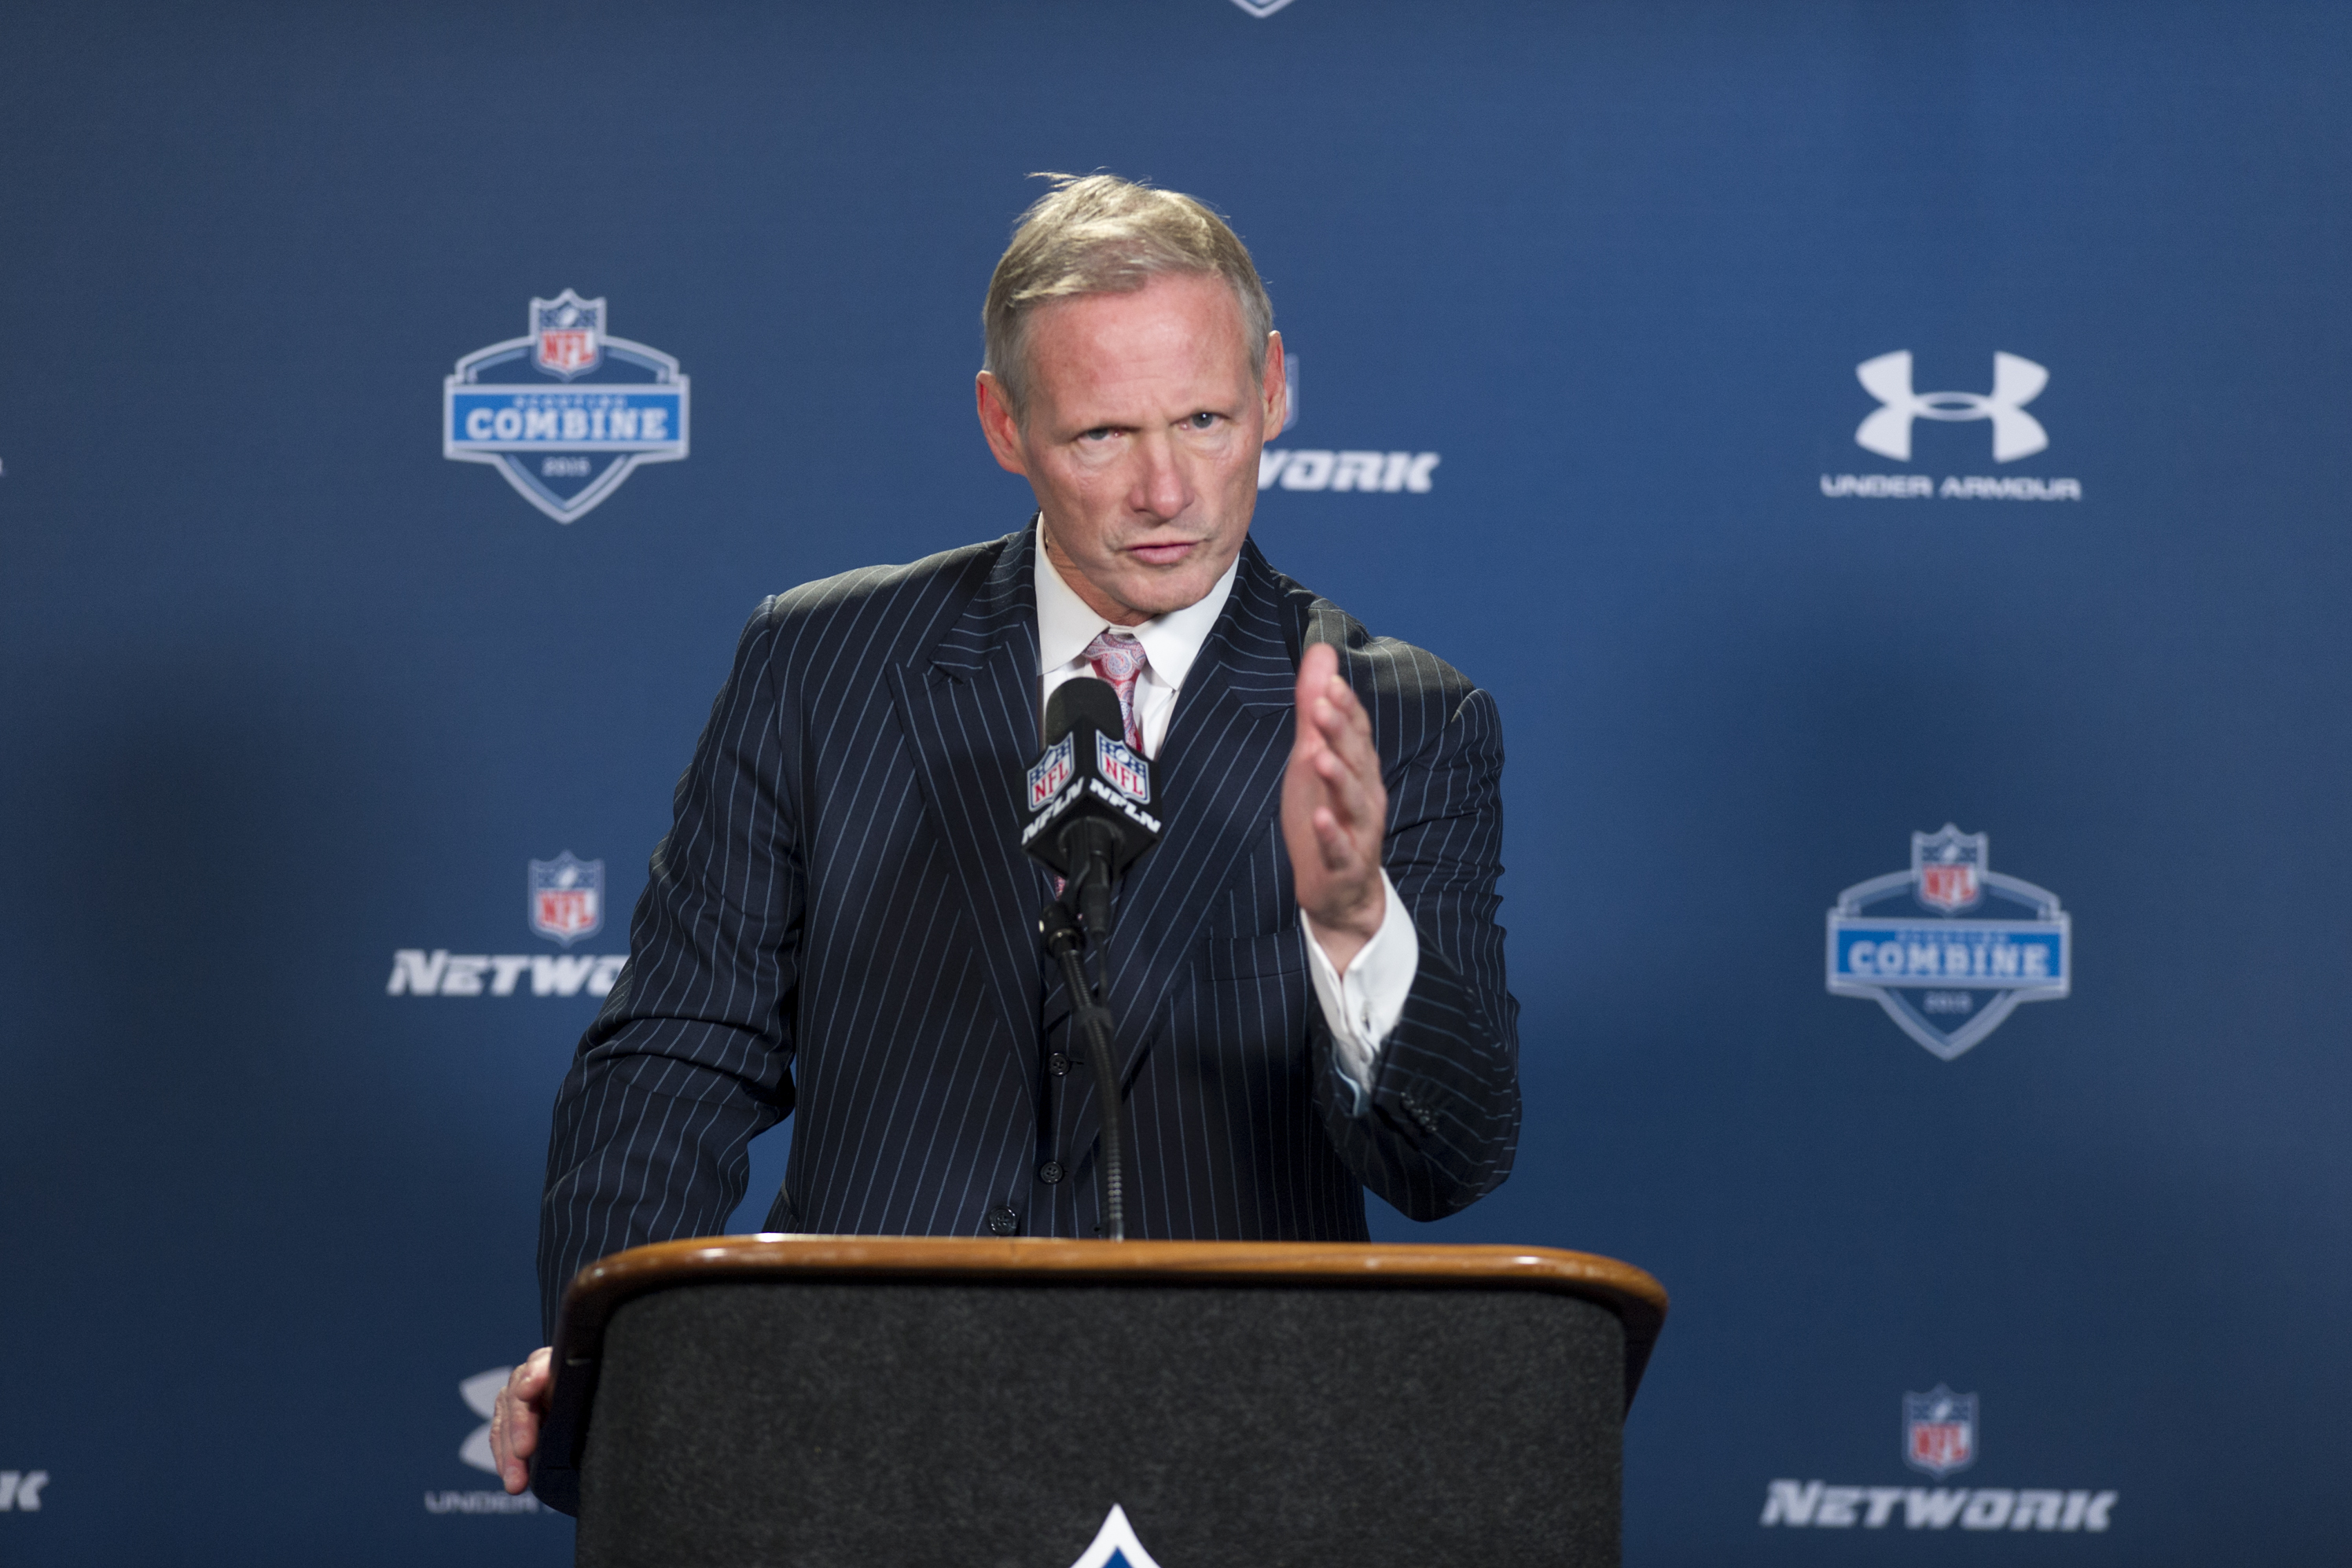 NFL Network - Mike Mayock's 2018 NFL Draft position rankings 2.0 feature  some new faces 